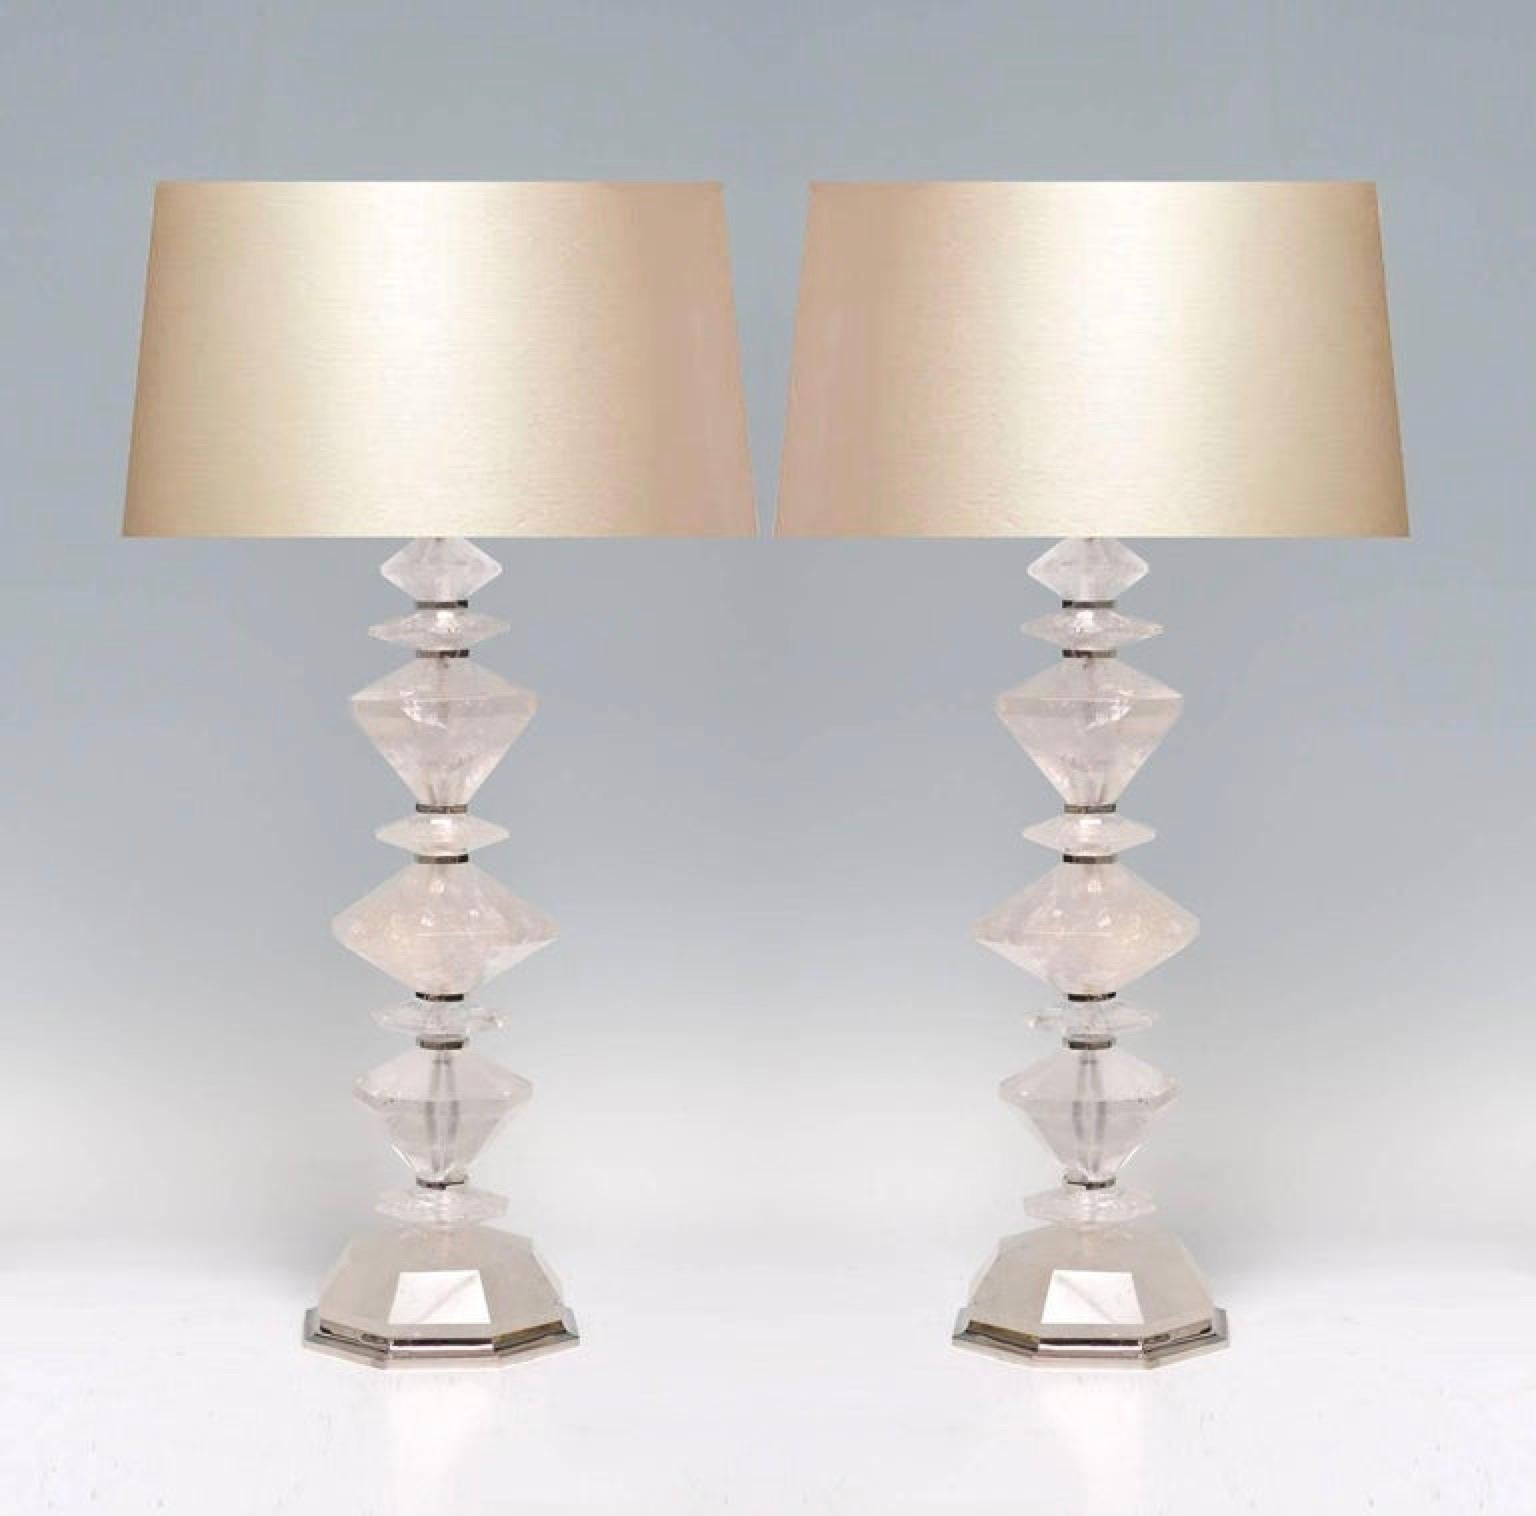 Pair of Diamond Form Rock Crystal Quartz Lamps by Phoenix In Excellent Condition For Sale In New York, NY